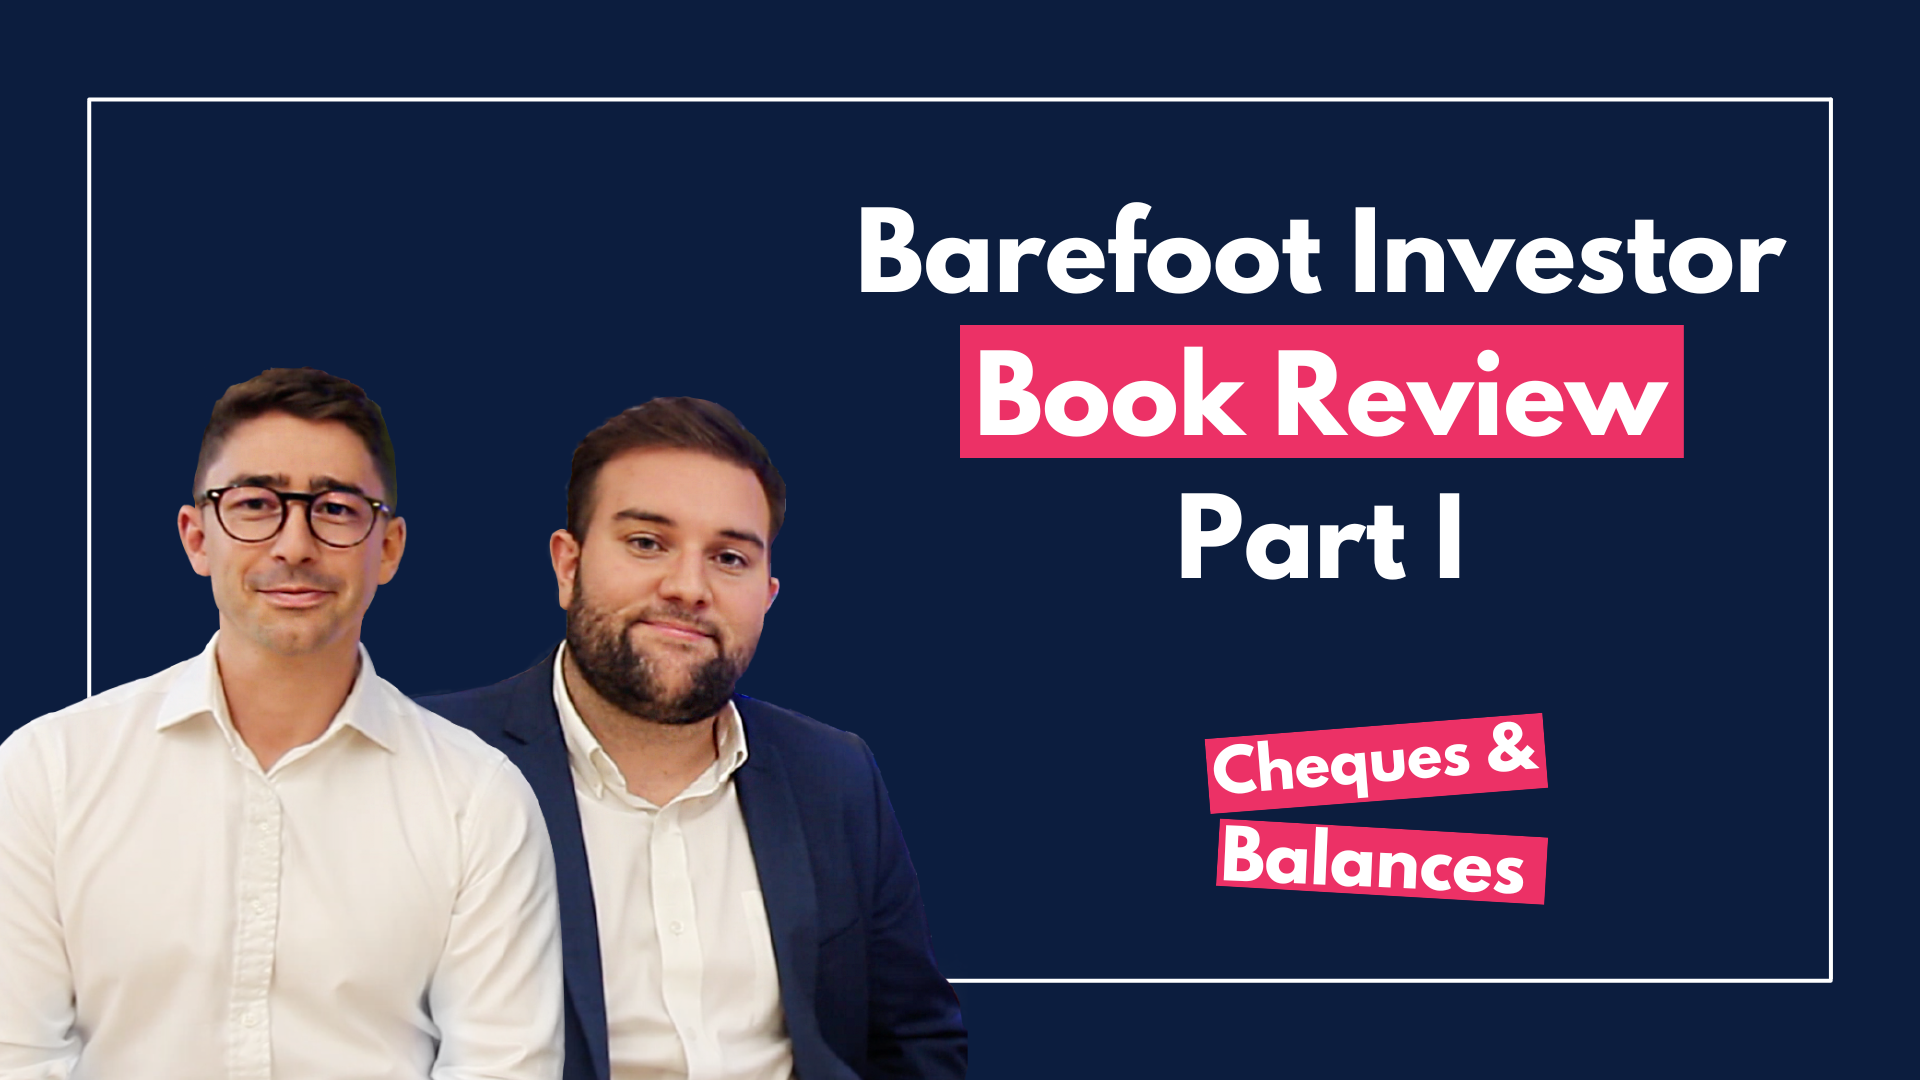 The Barefoot Investor Book Review – Part 1